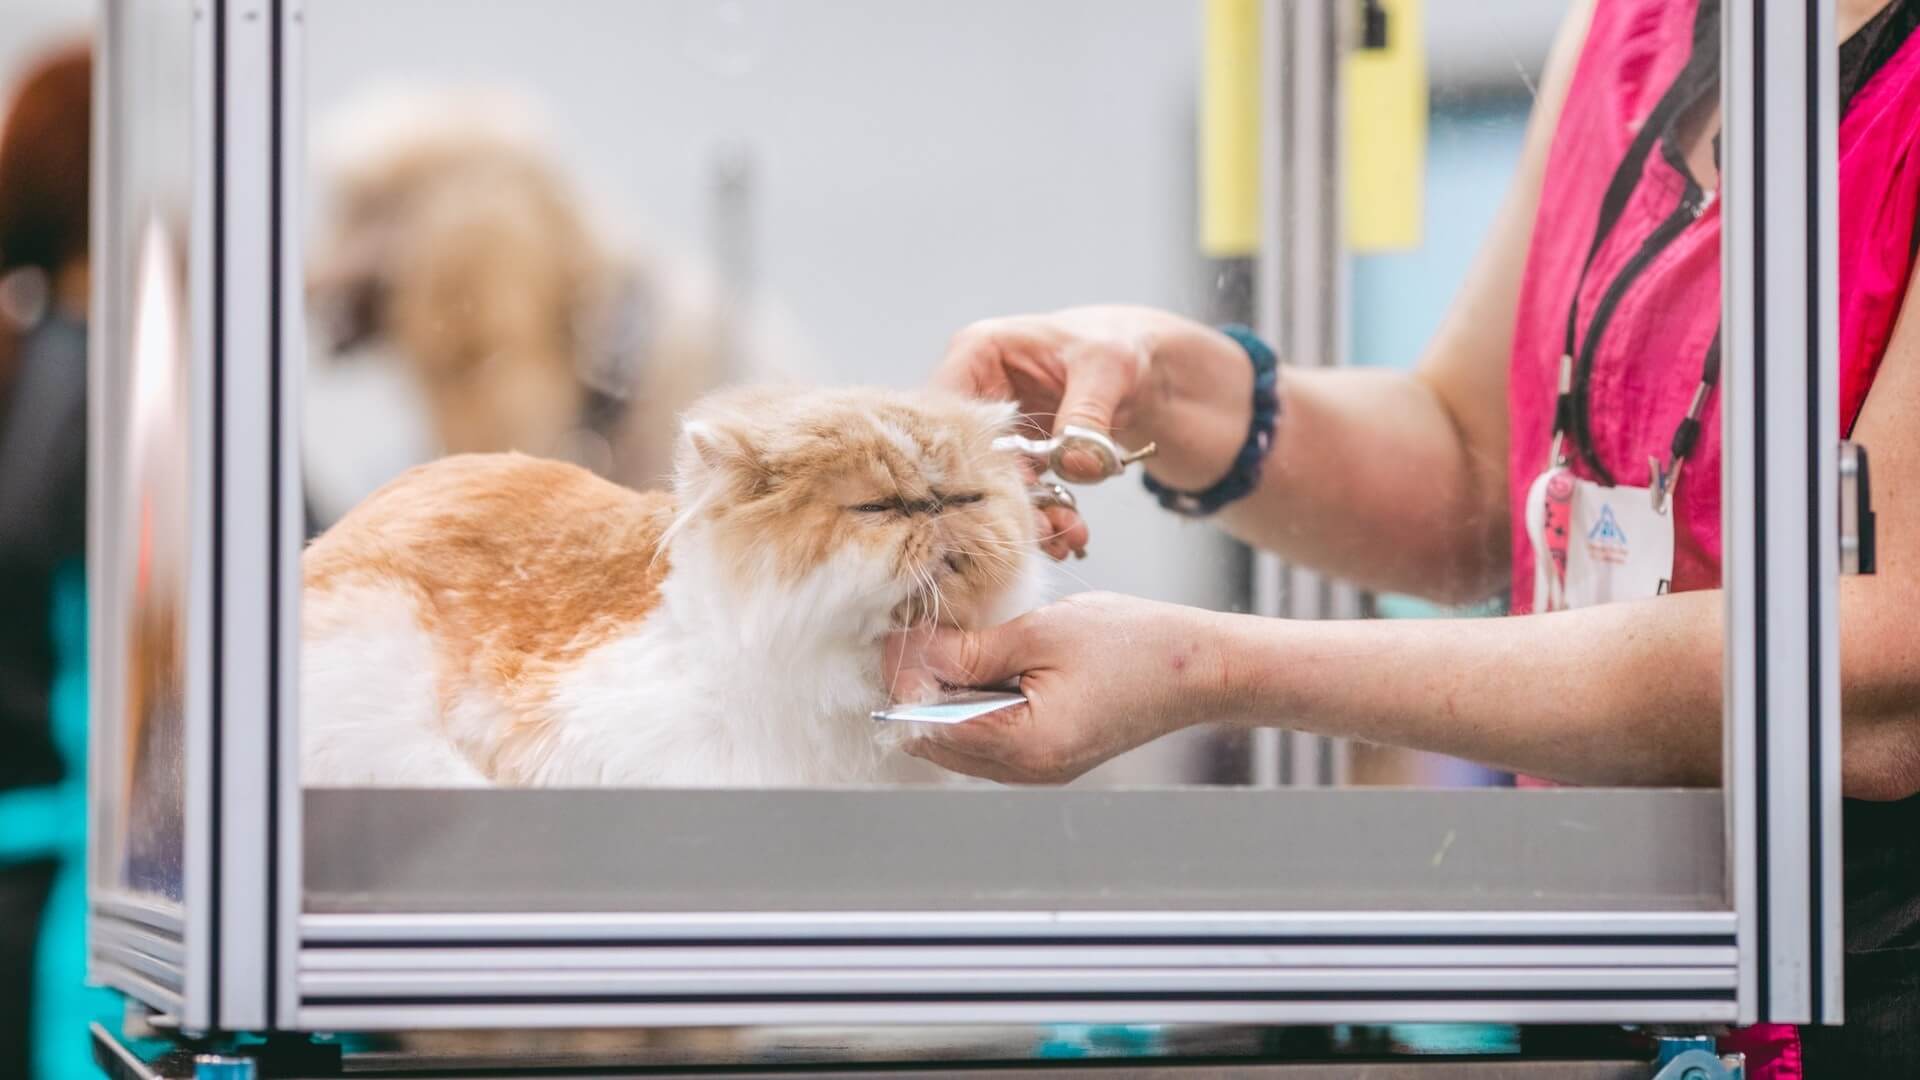 A contented cat receiving grooming services from a professional groomer.